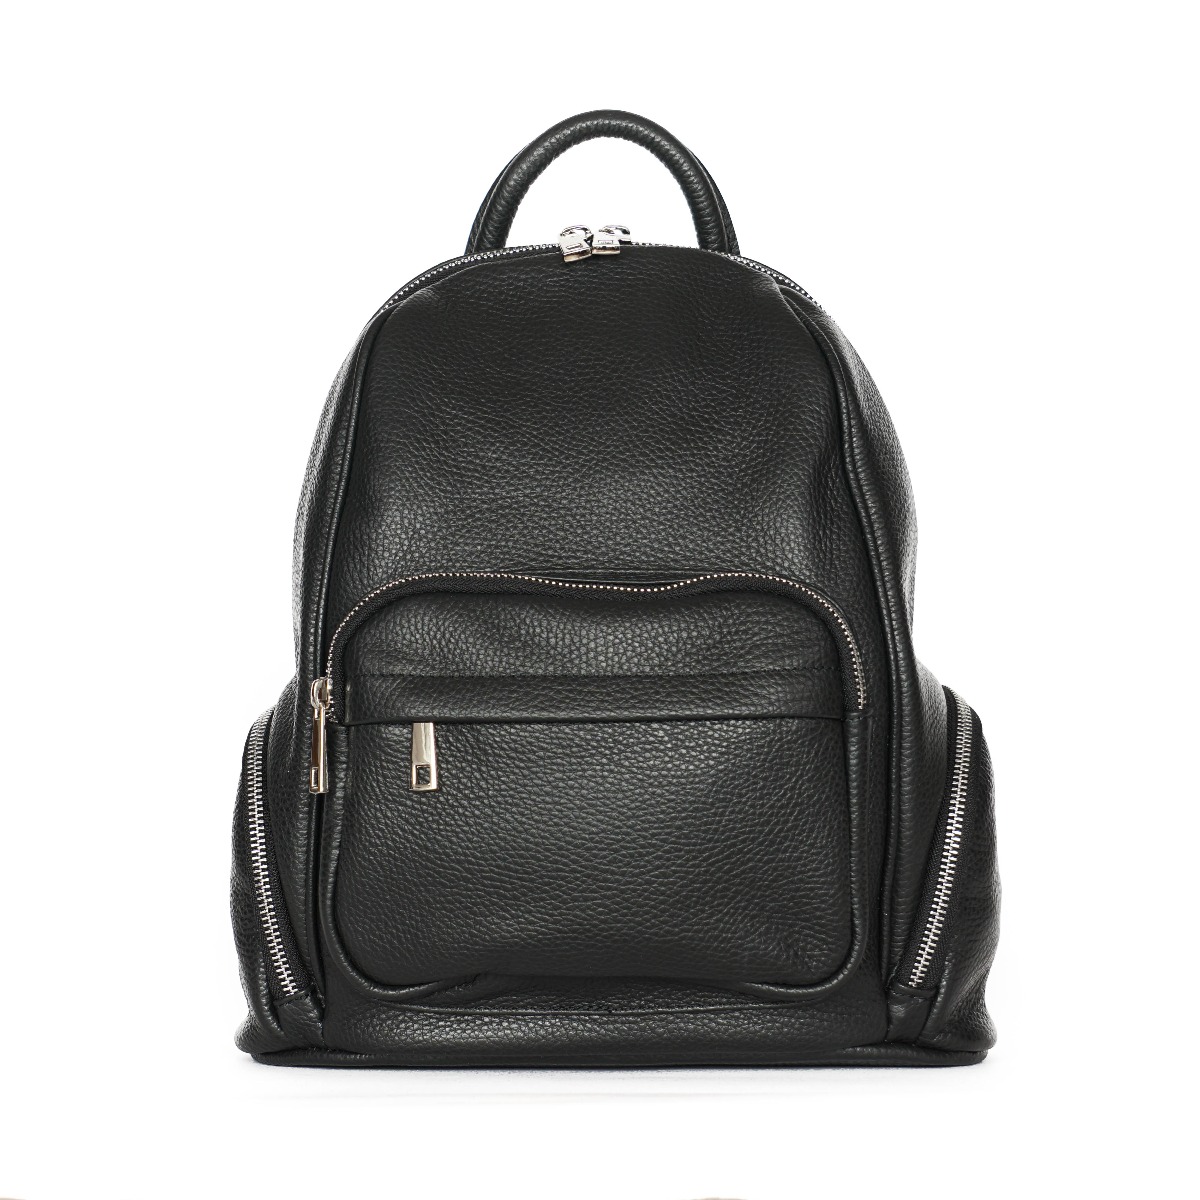 Women's black backpack with pockets 